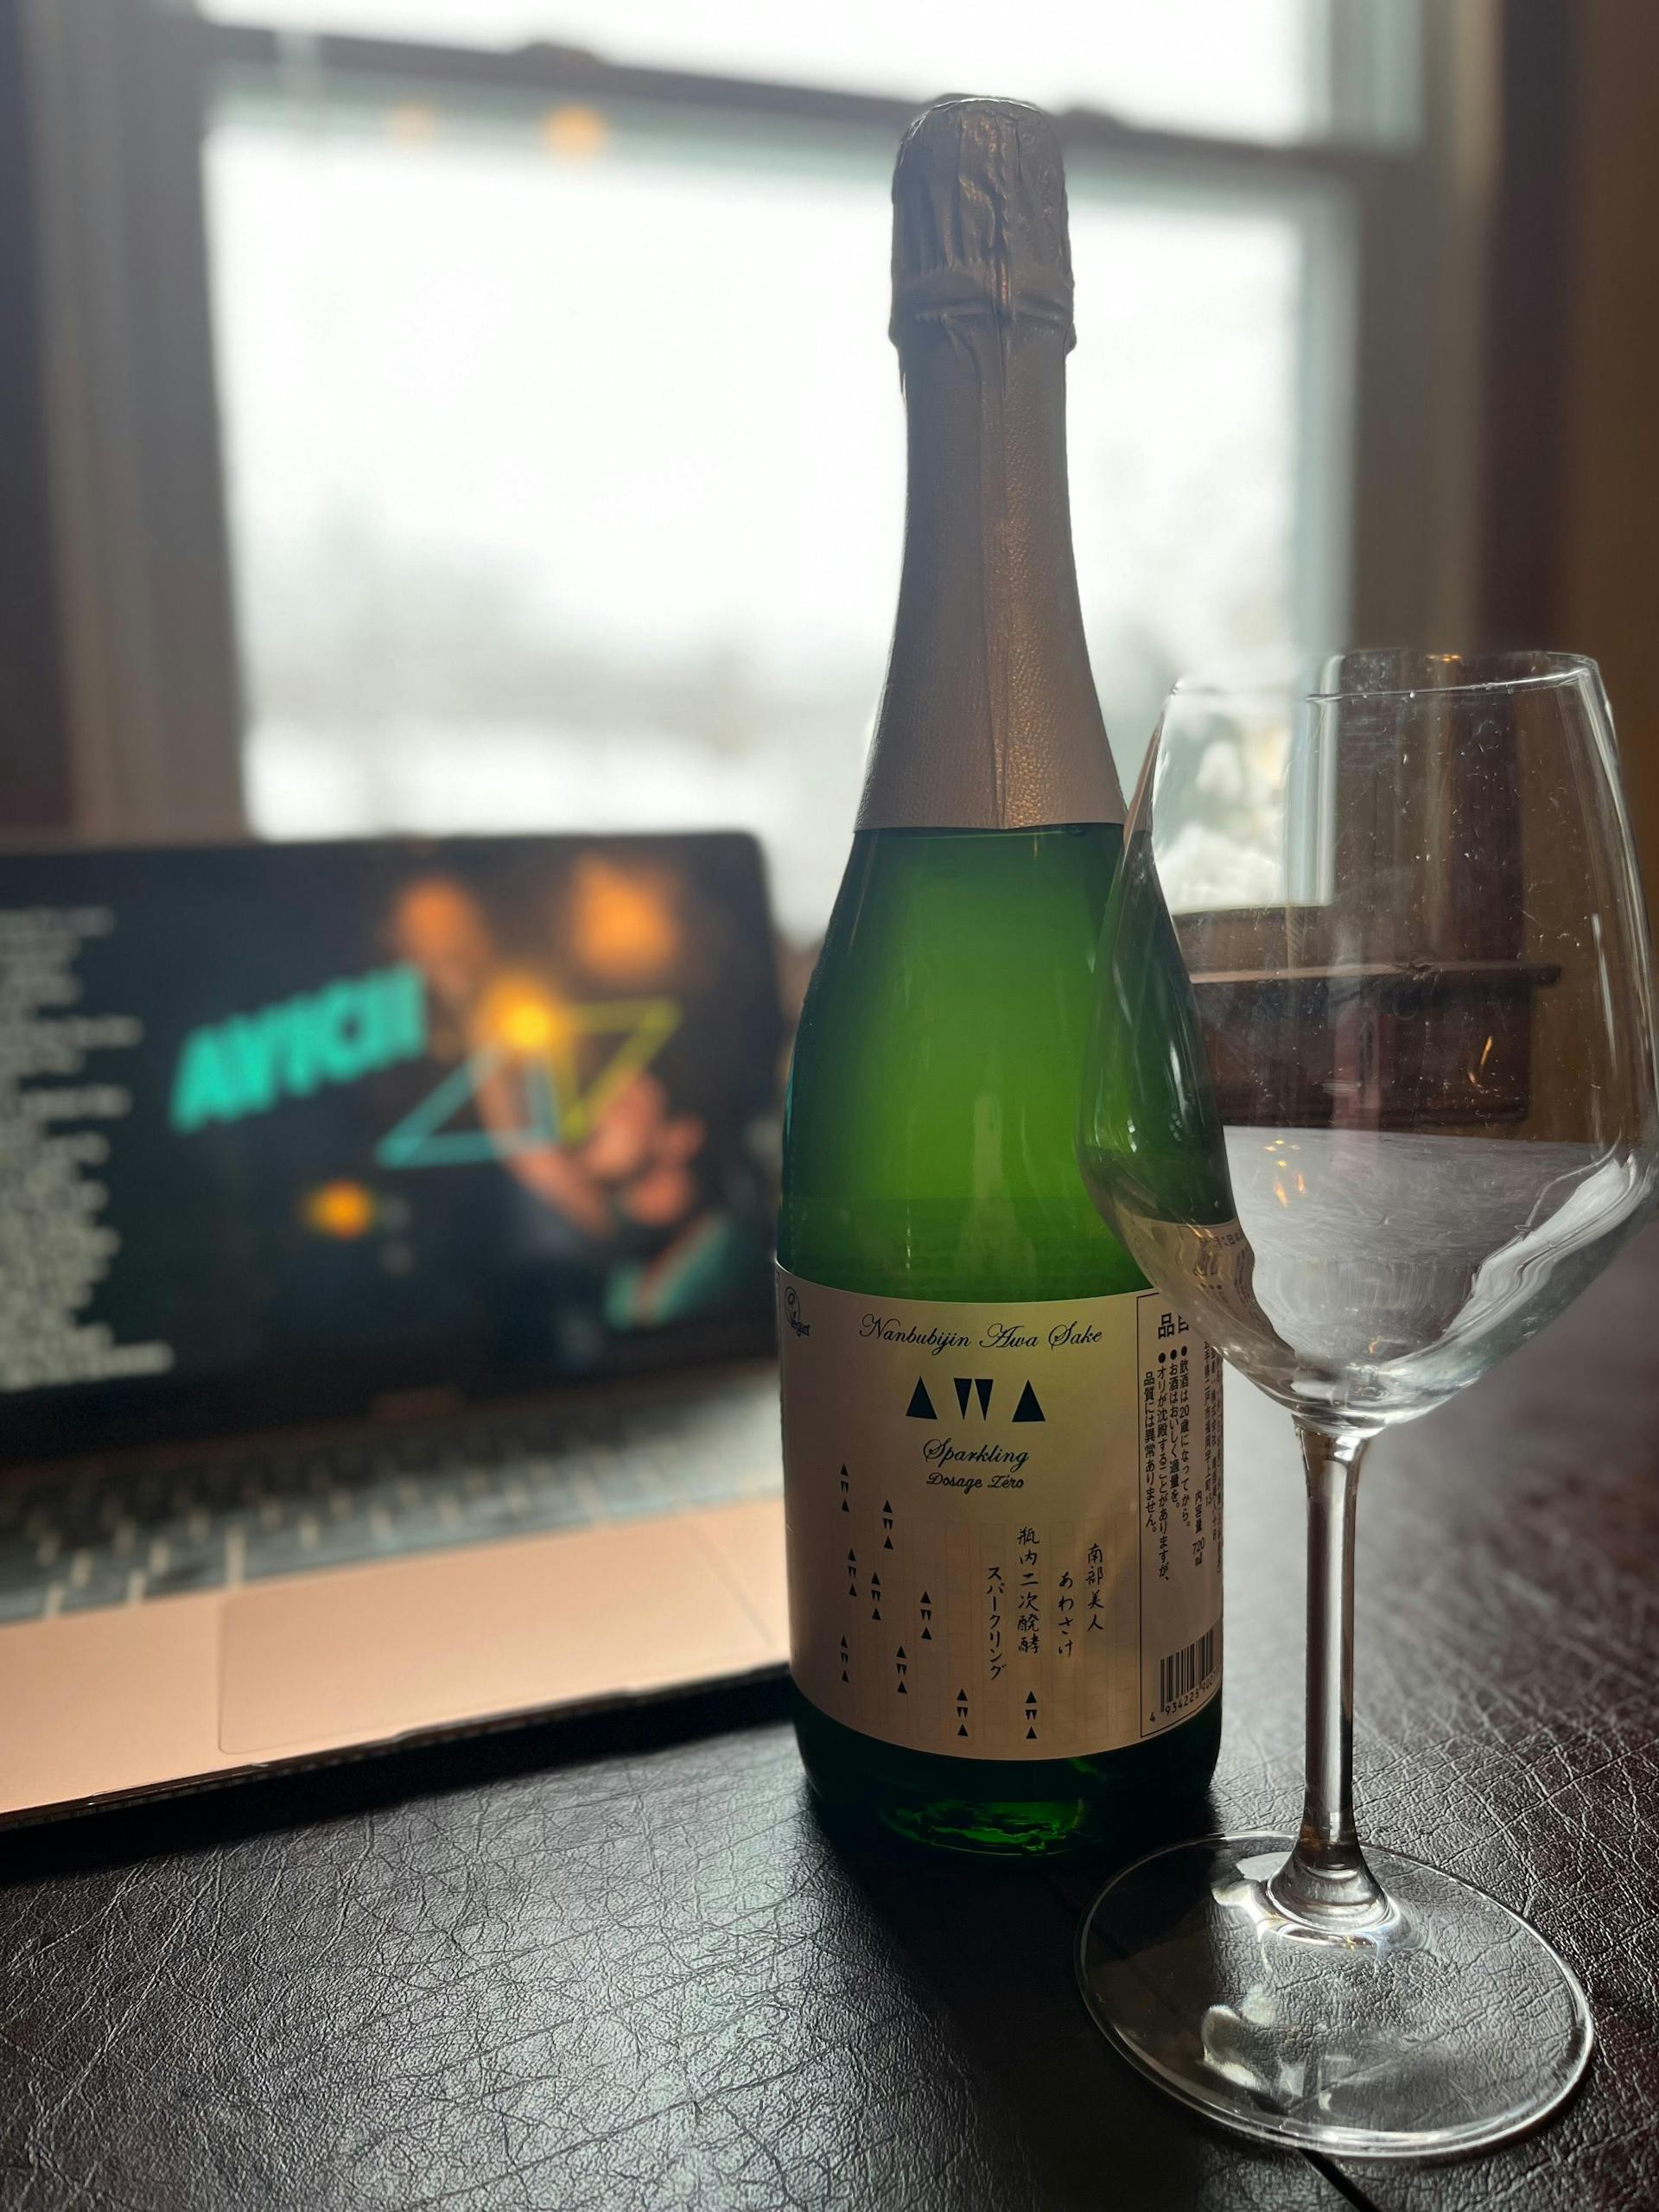 Nanbu Bijin “AWA Sparkling” in front of laptop streaming songs by Avicii via YouTube. Song playing: “Levels.”